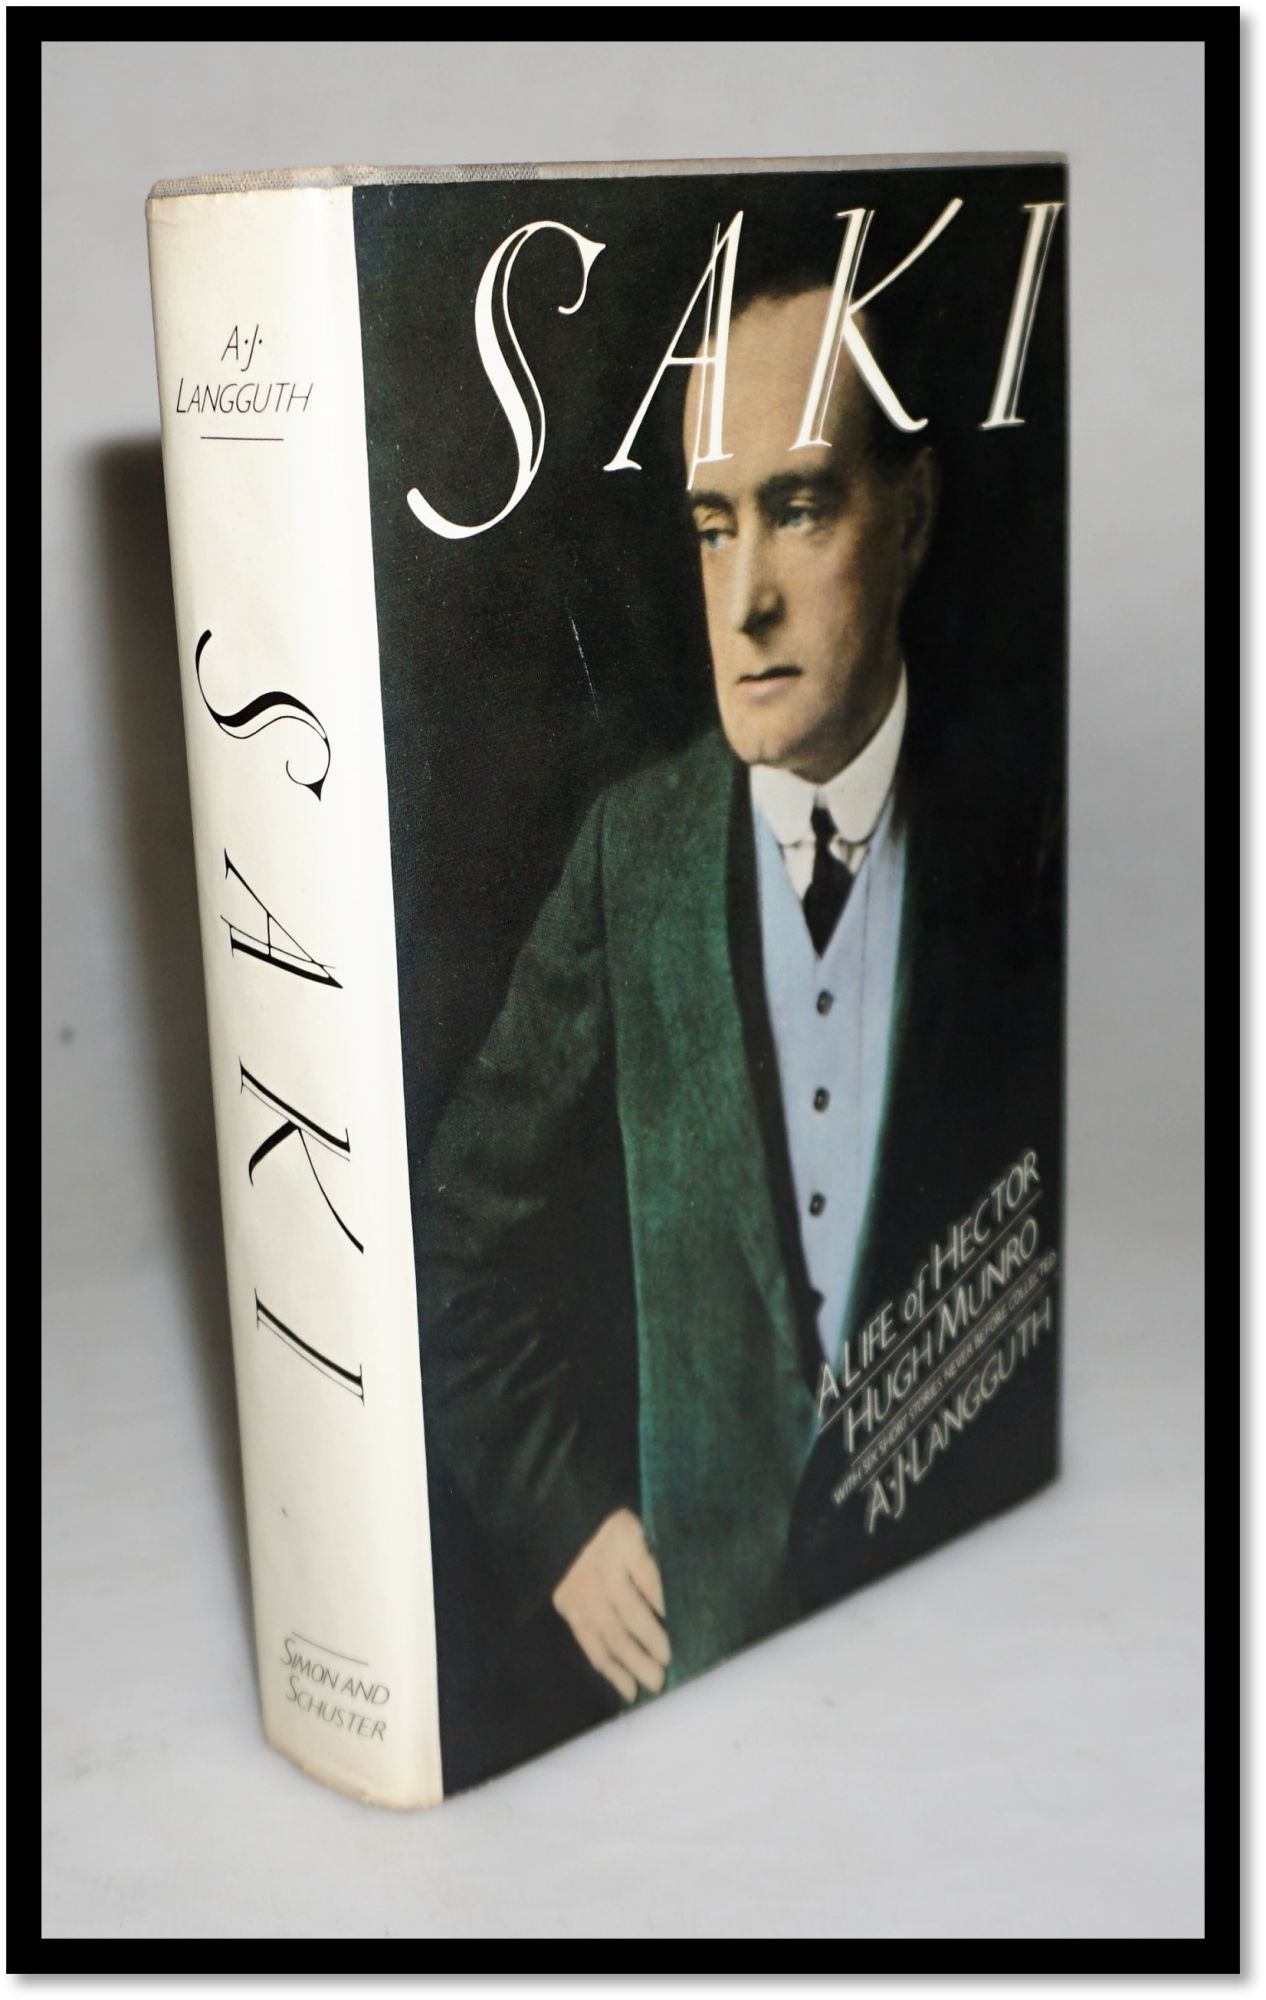 Saki. A Life of Hector Hugh Munro with Six Short Stories Never Before Collected - Langguth, A. J.